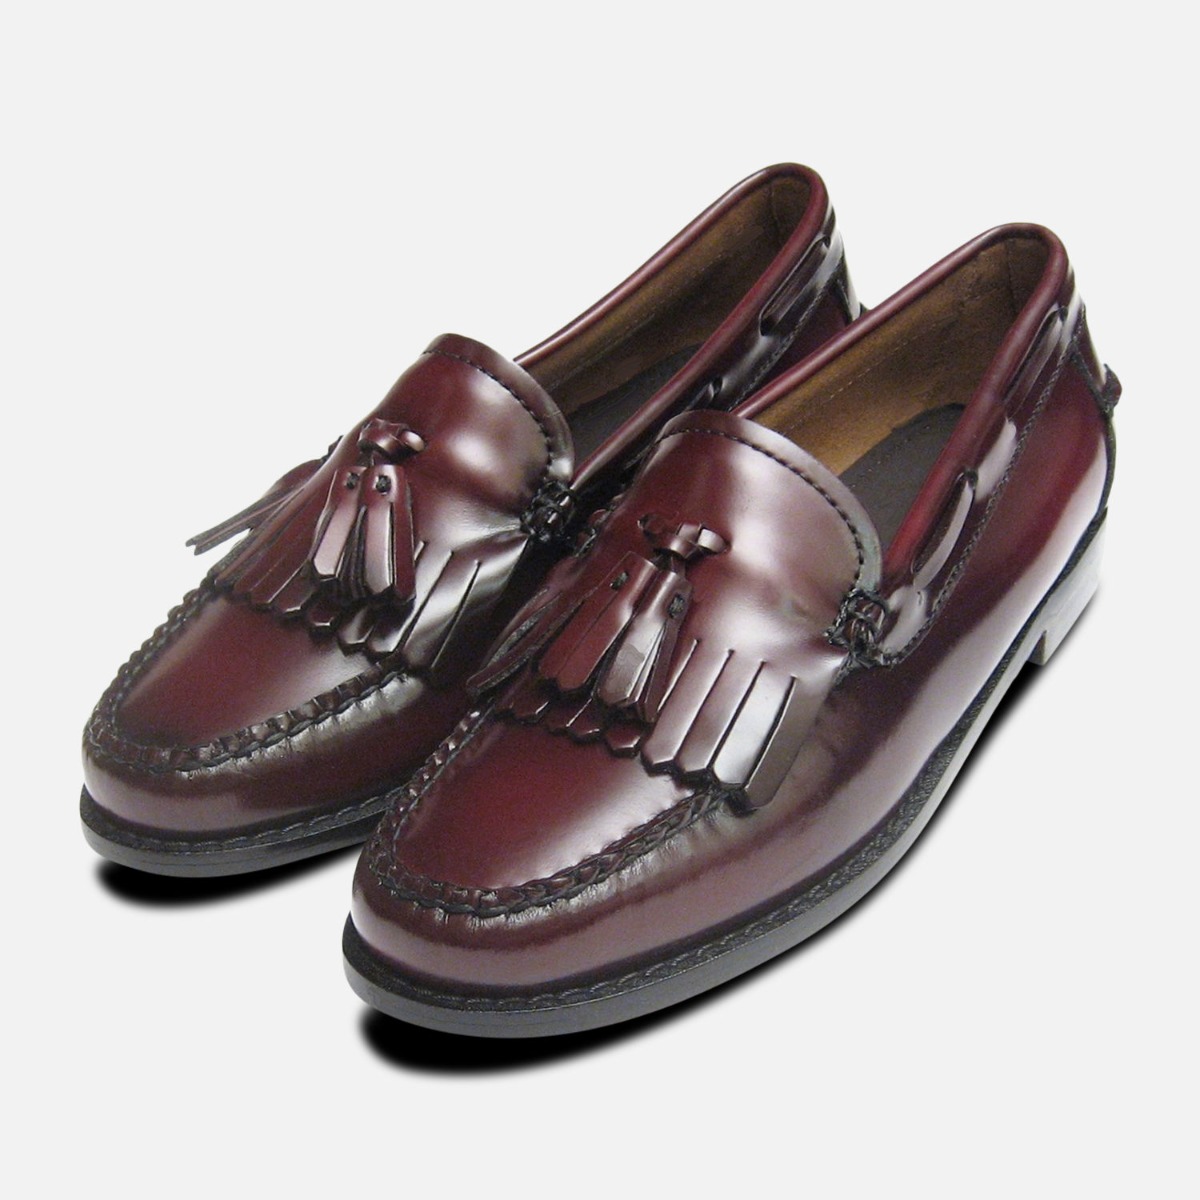 bass loafers ladies